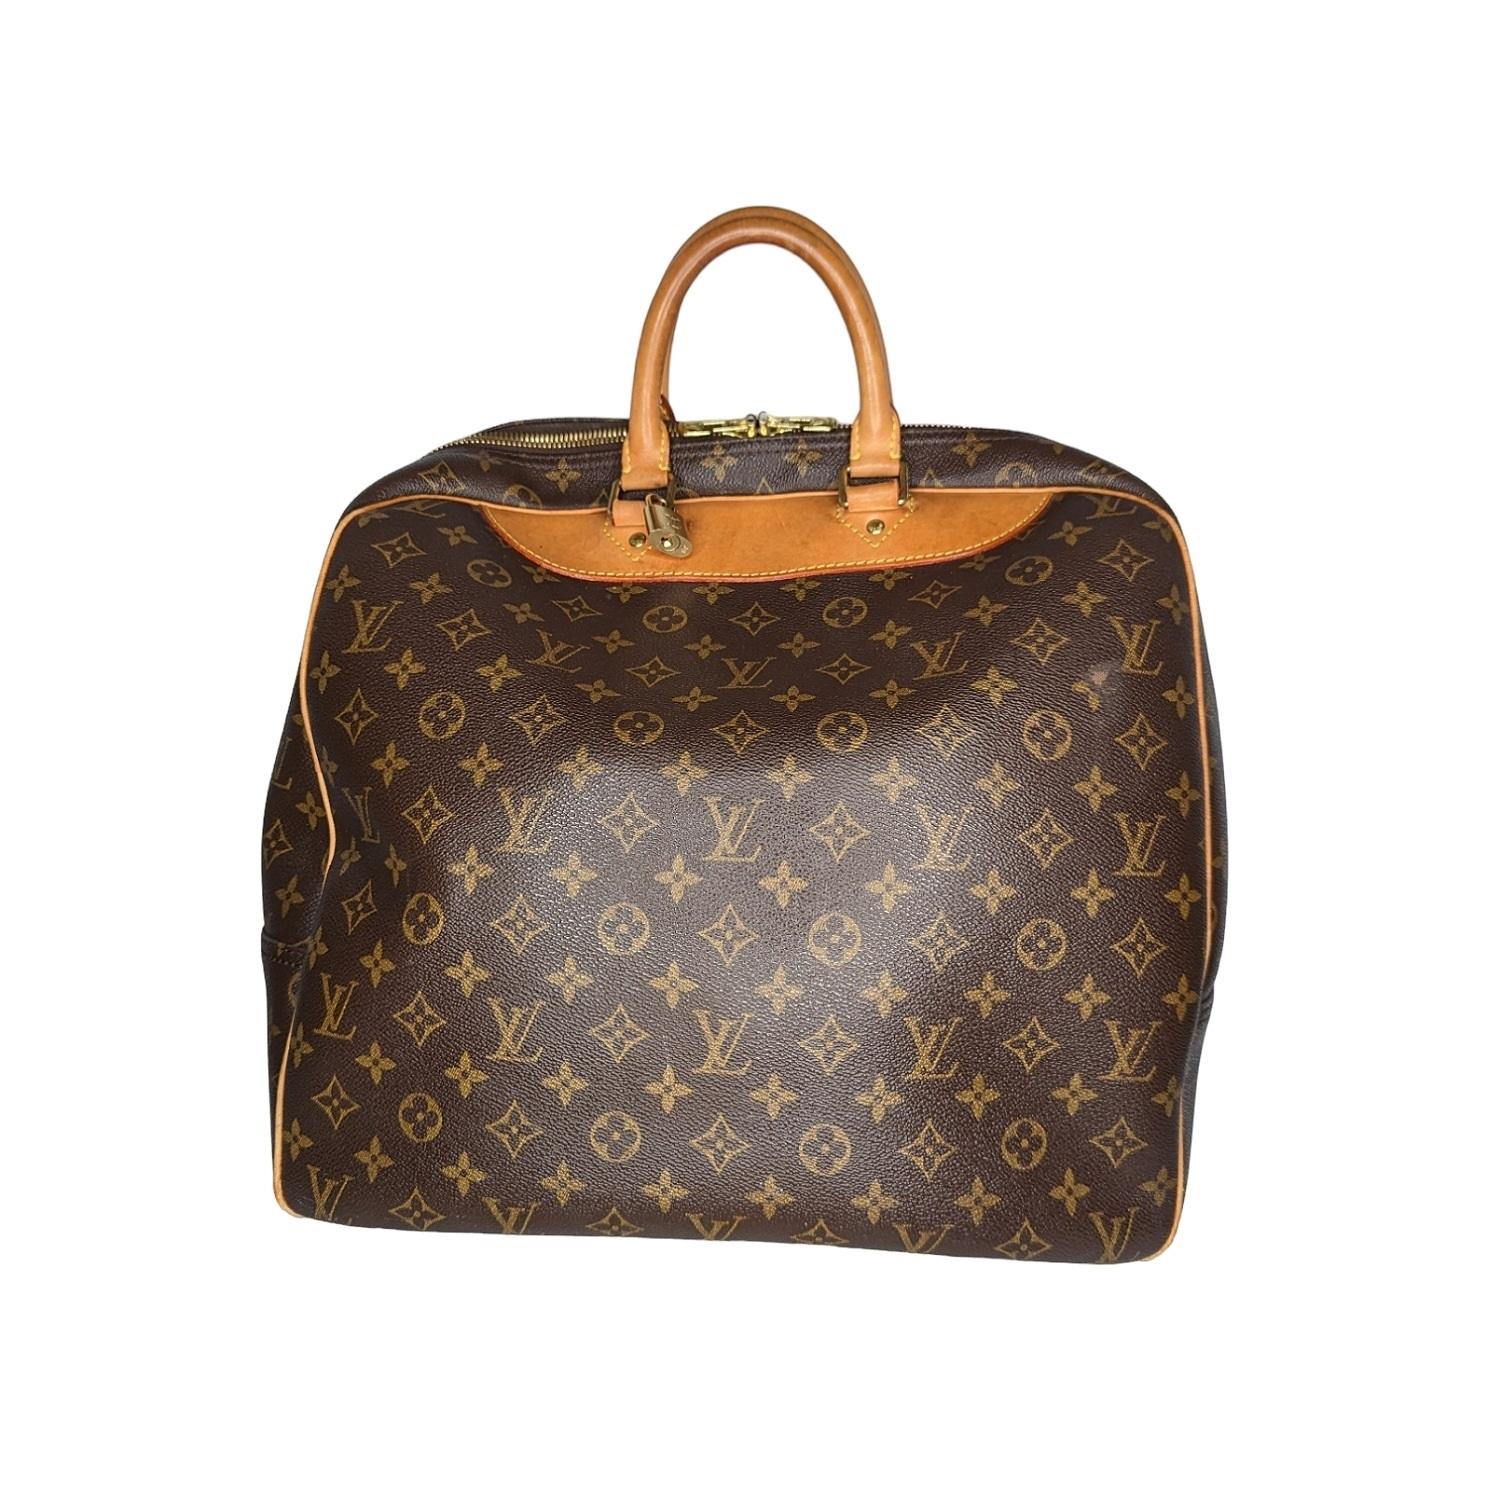 This bag is done in a traditional canvas with vachetta leather trim. The interior is done in a tan textile lining. This bag features a zip top closure and gold-tone hardware. Est. Retail $1,810.

Designer: Louis Vuitton
Material: Monogram coated